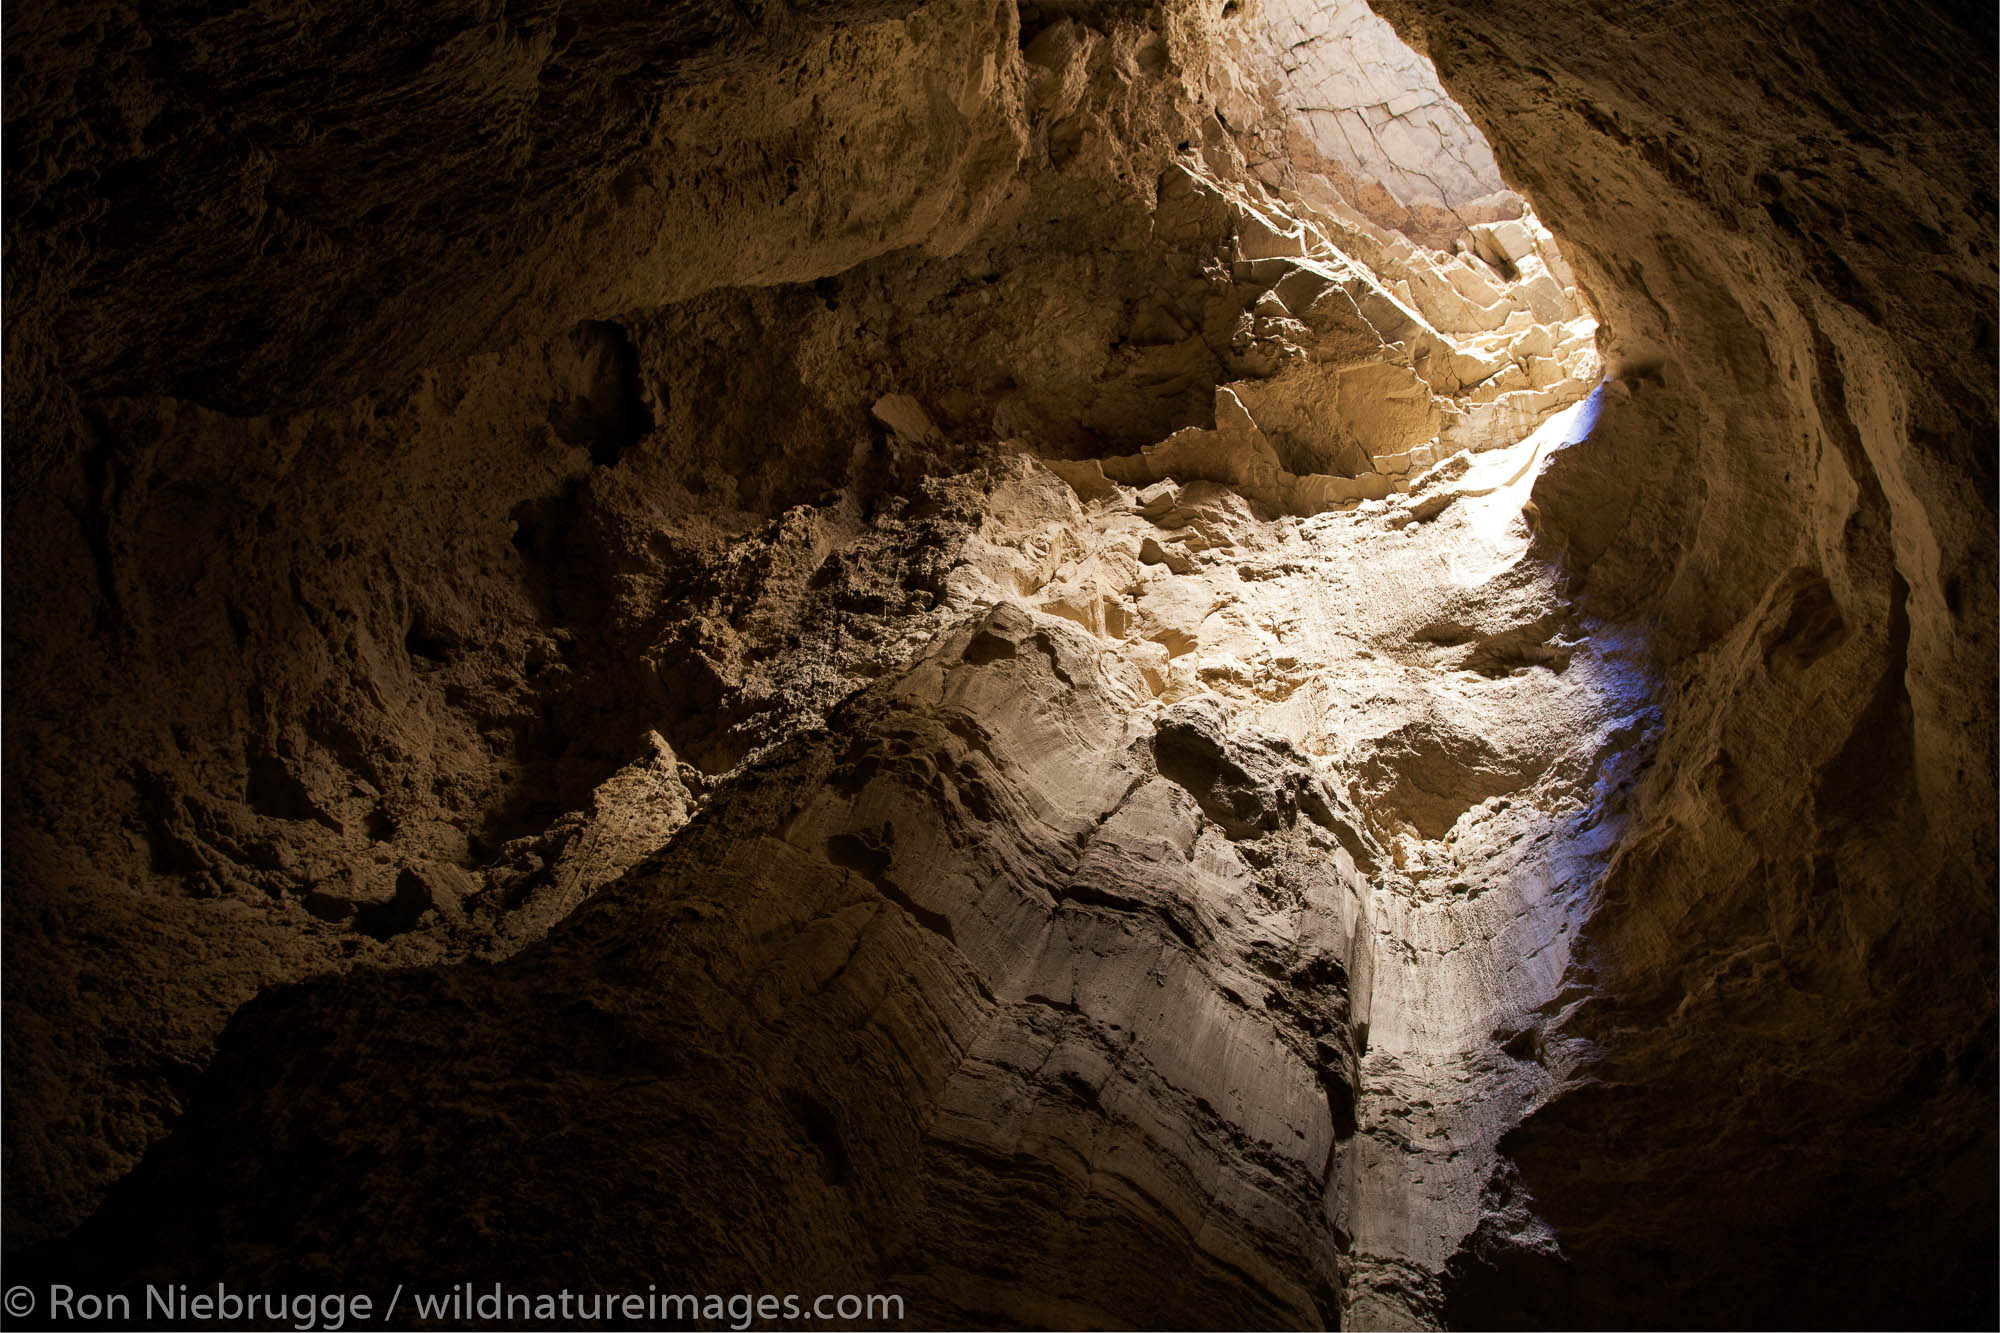 Some of the biggest mud caves in the world, Anza-Borrego Desert State Park, California.